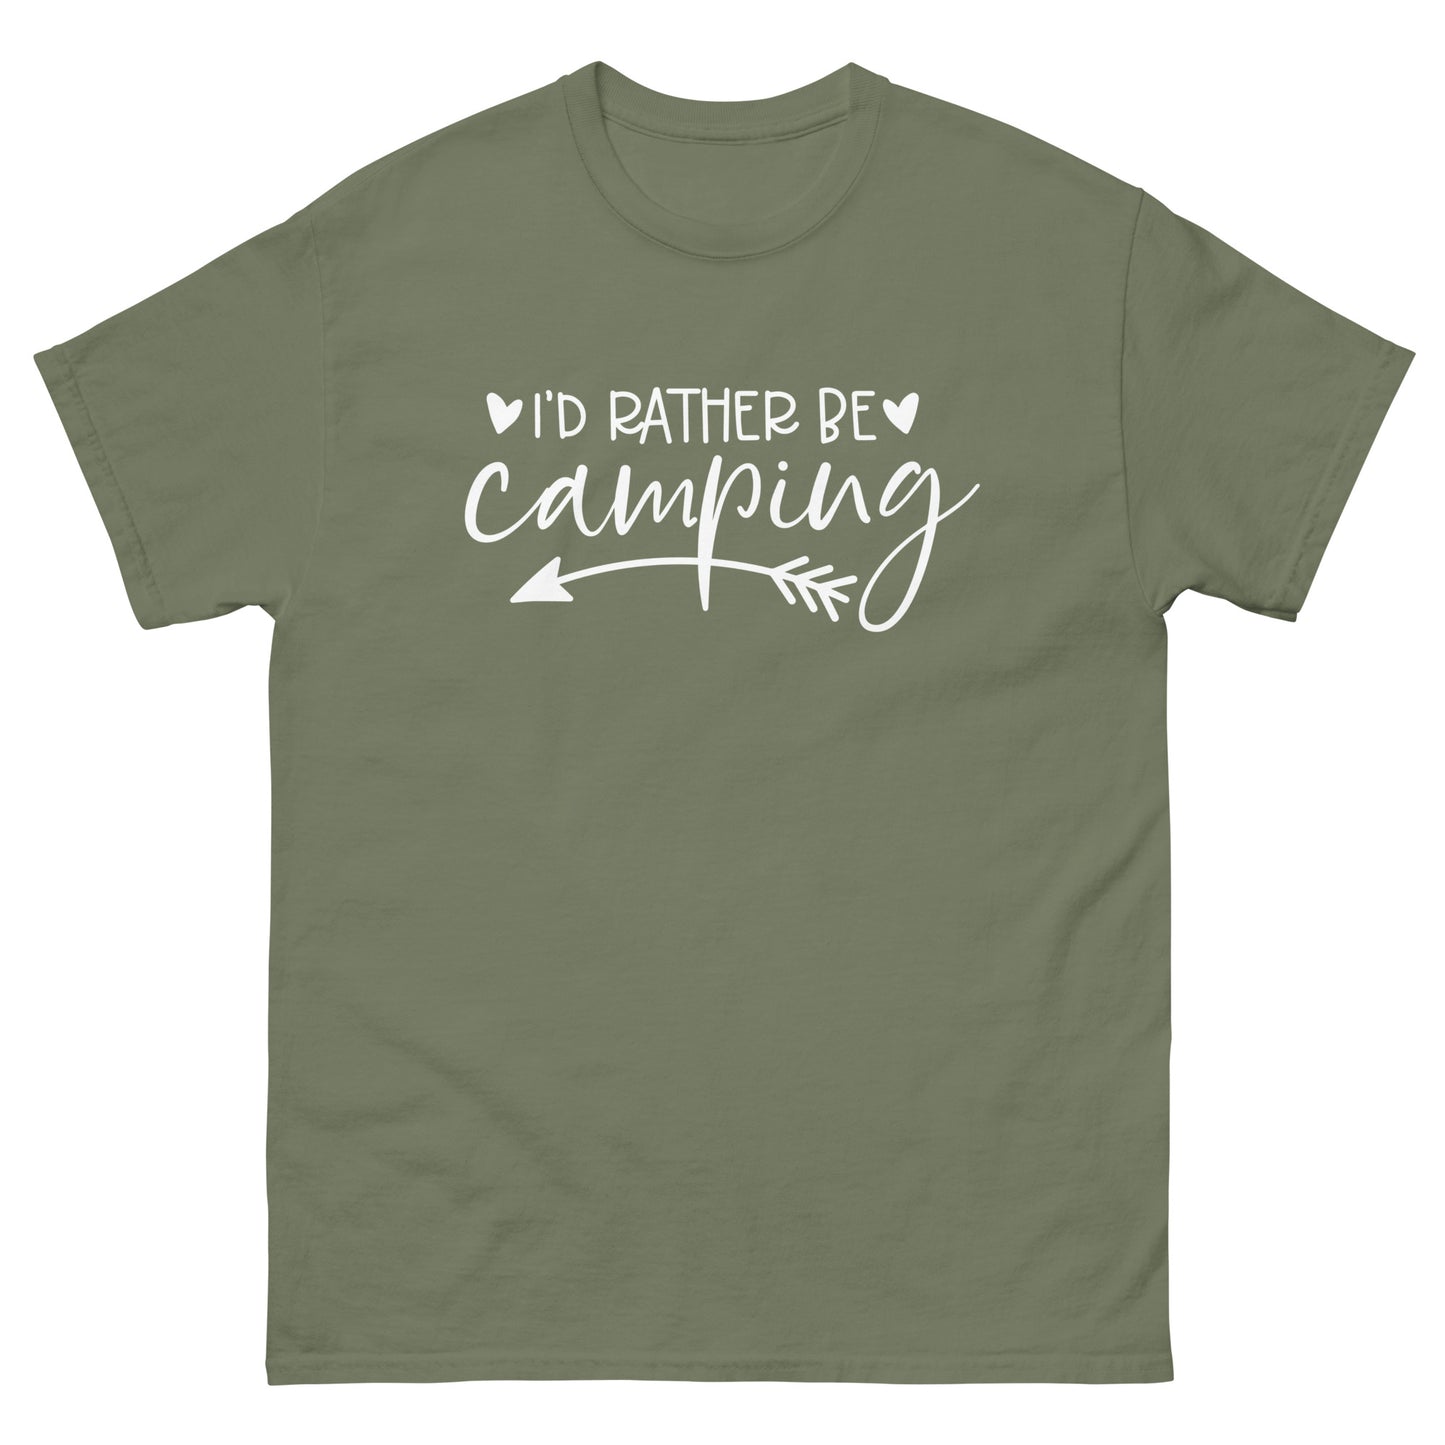 I'd rather be camping - classic tee